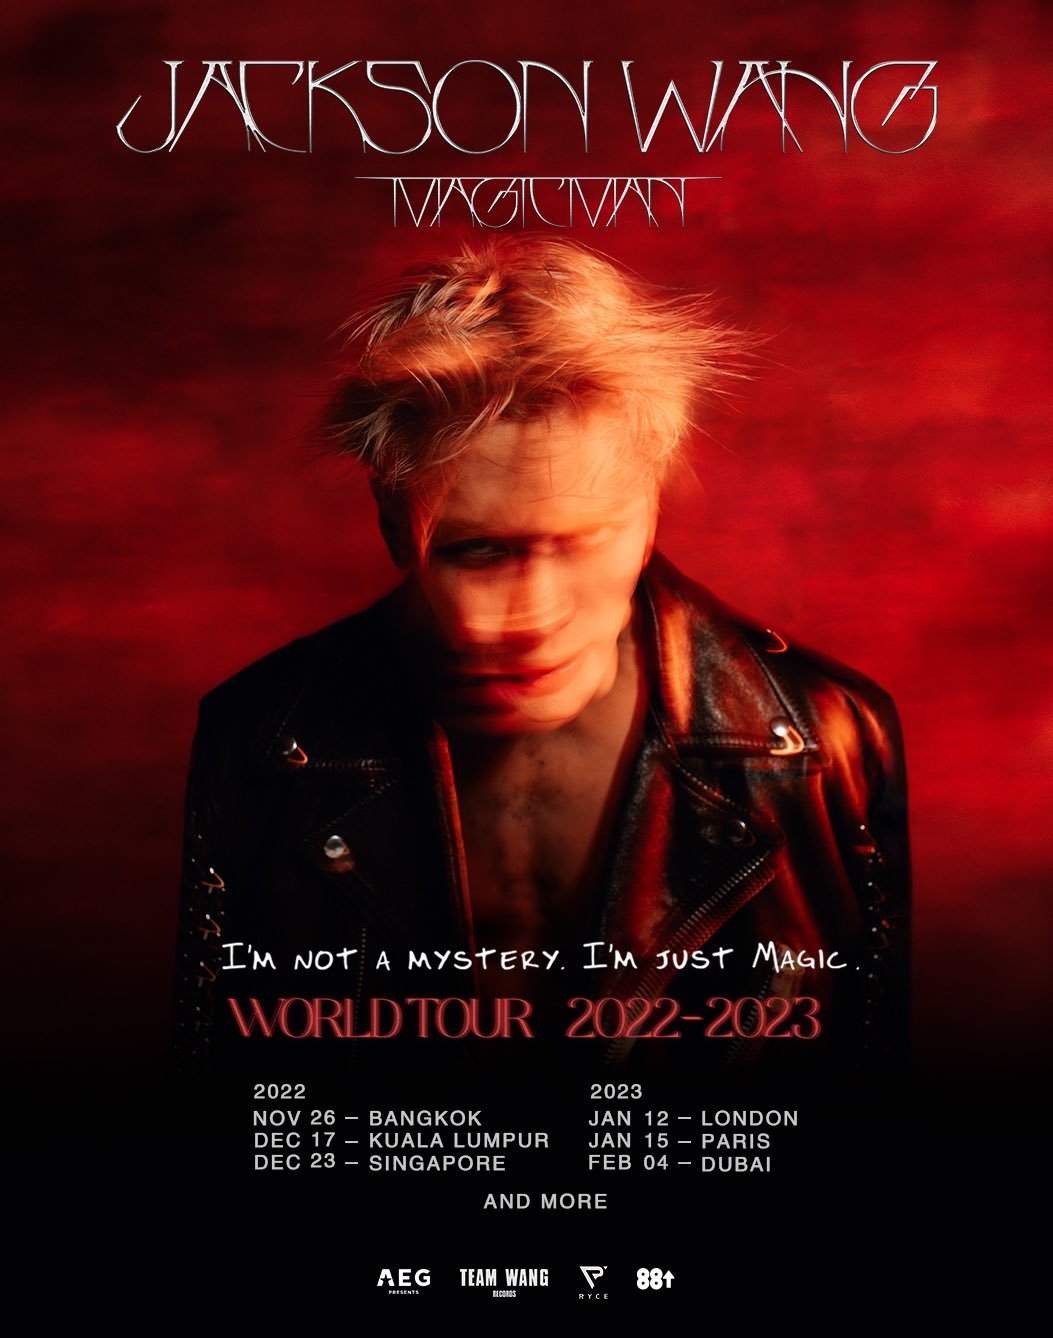 Jackson Wang announces Magic Man World Tour with stops in Asia & Europe